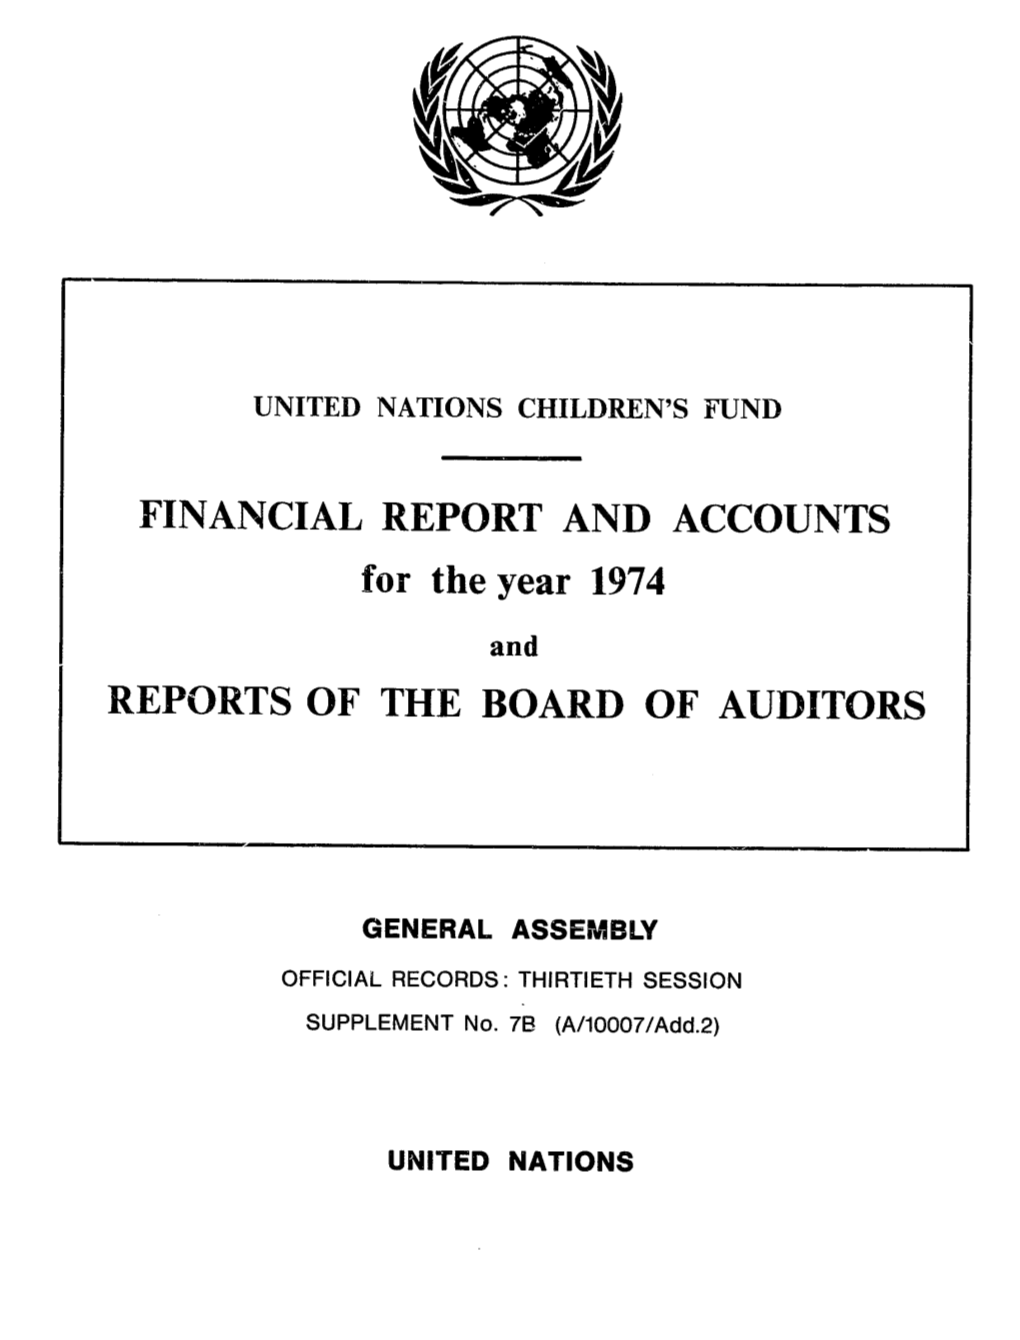 FINANCIAL REPORT and ACCOUNTS for the Year 1974